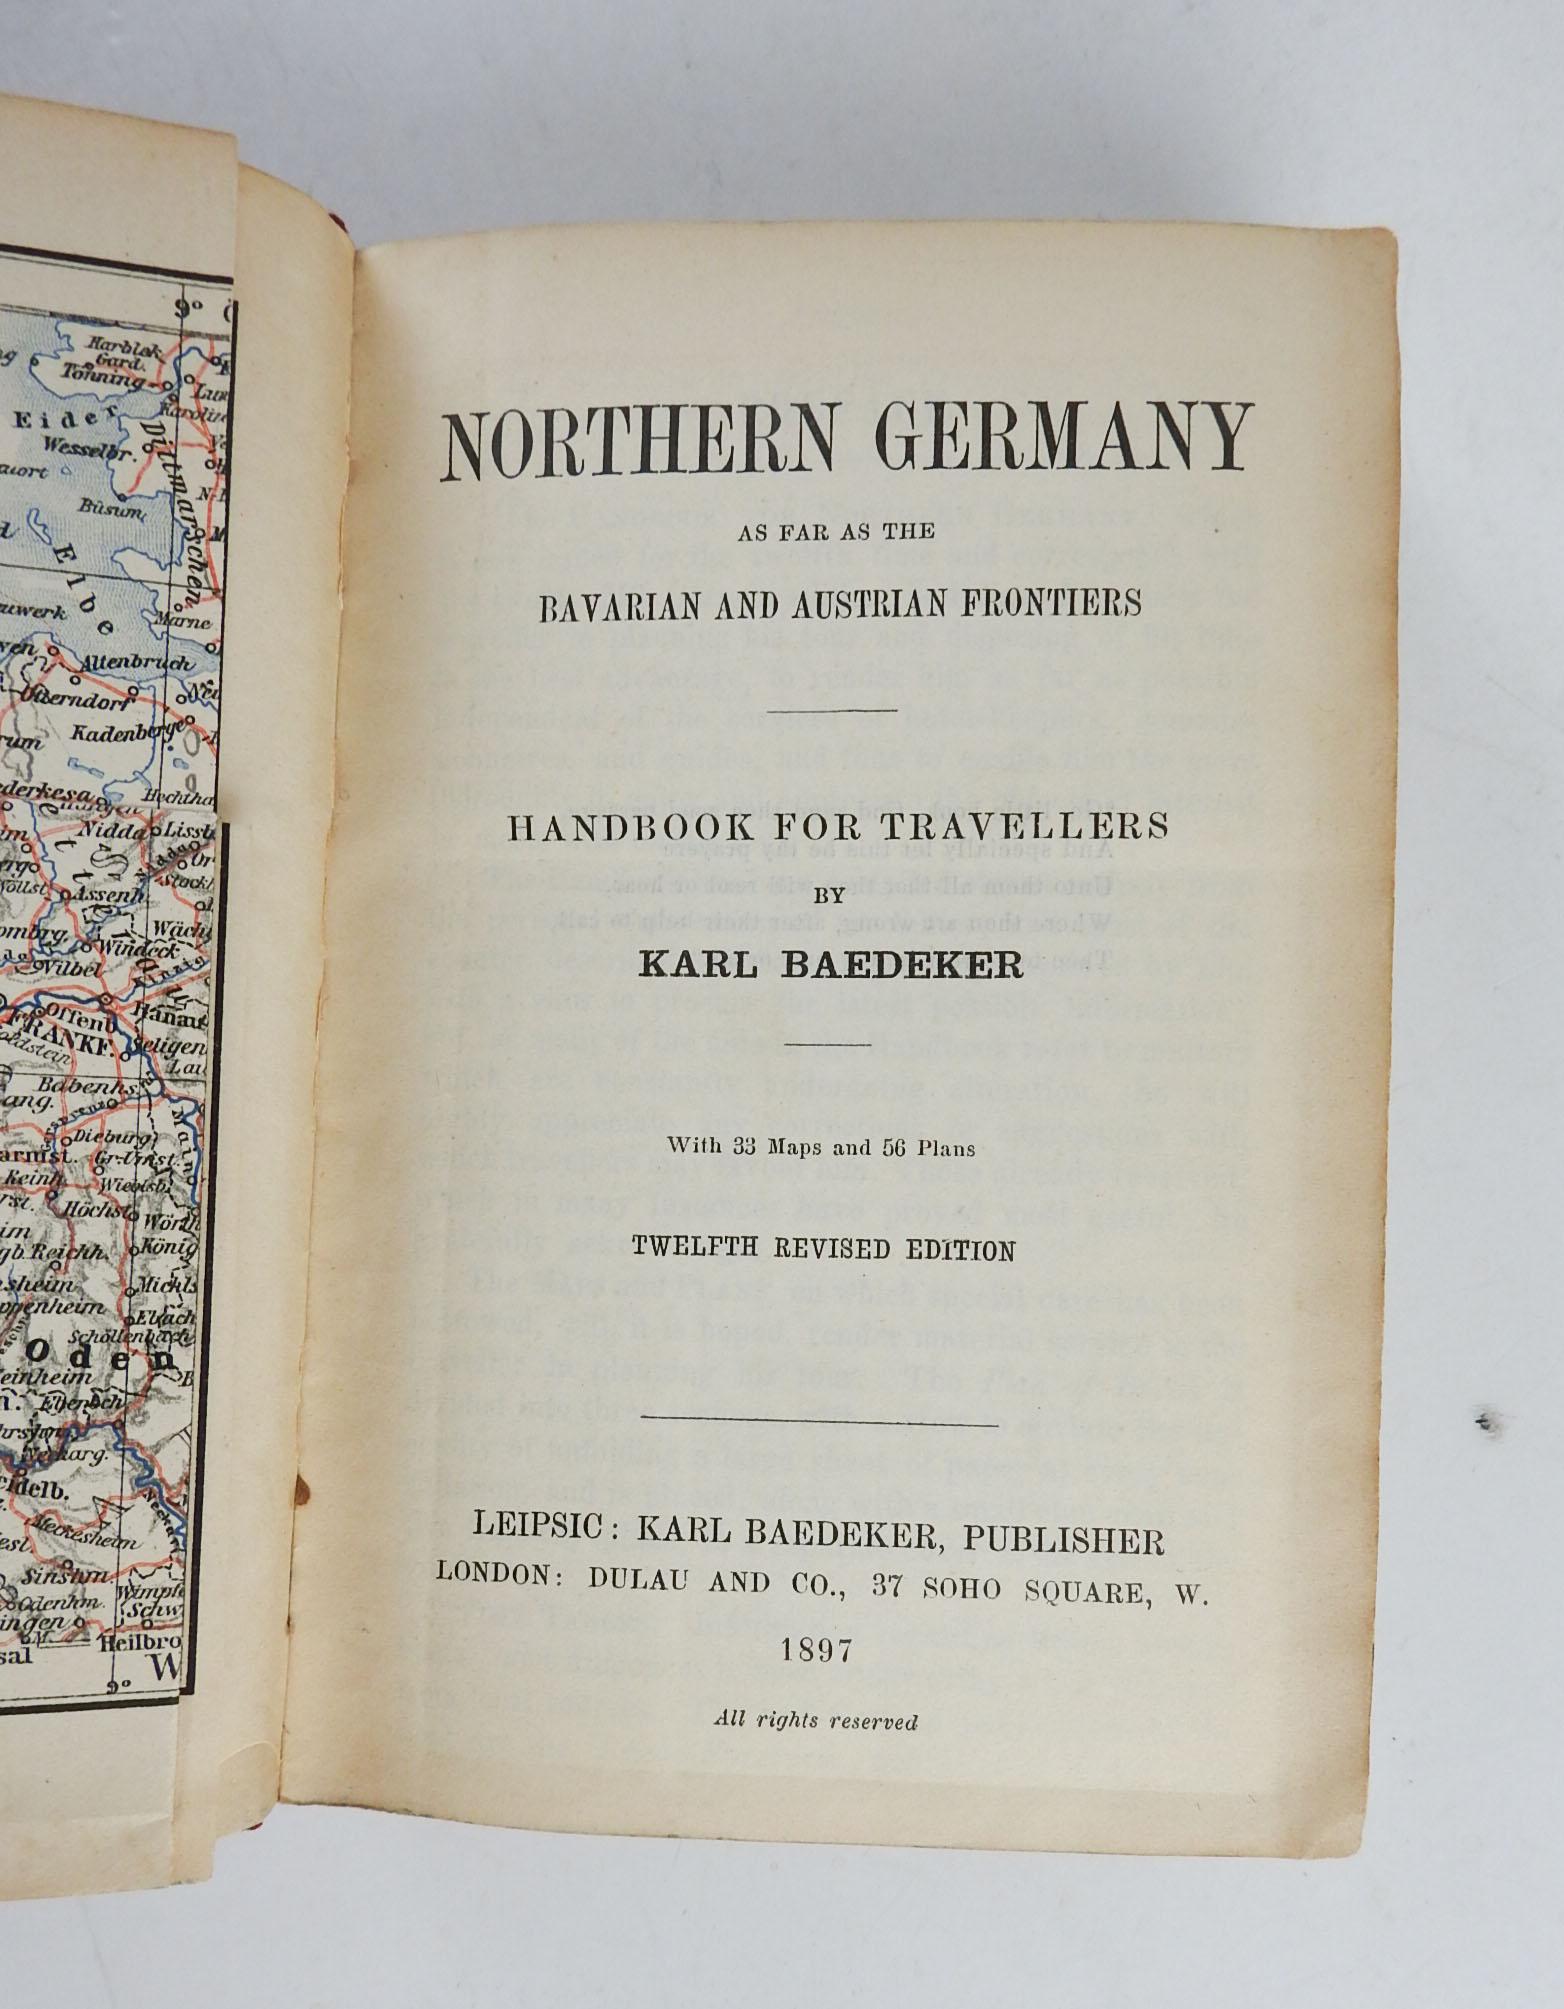 Grand Tour Baedeker's Germany Travel Guides 1897 & 1914 - a Pair For Sale